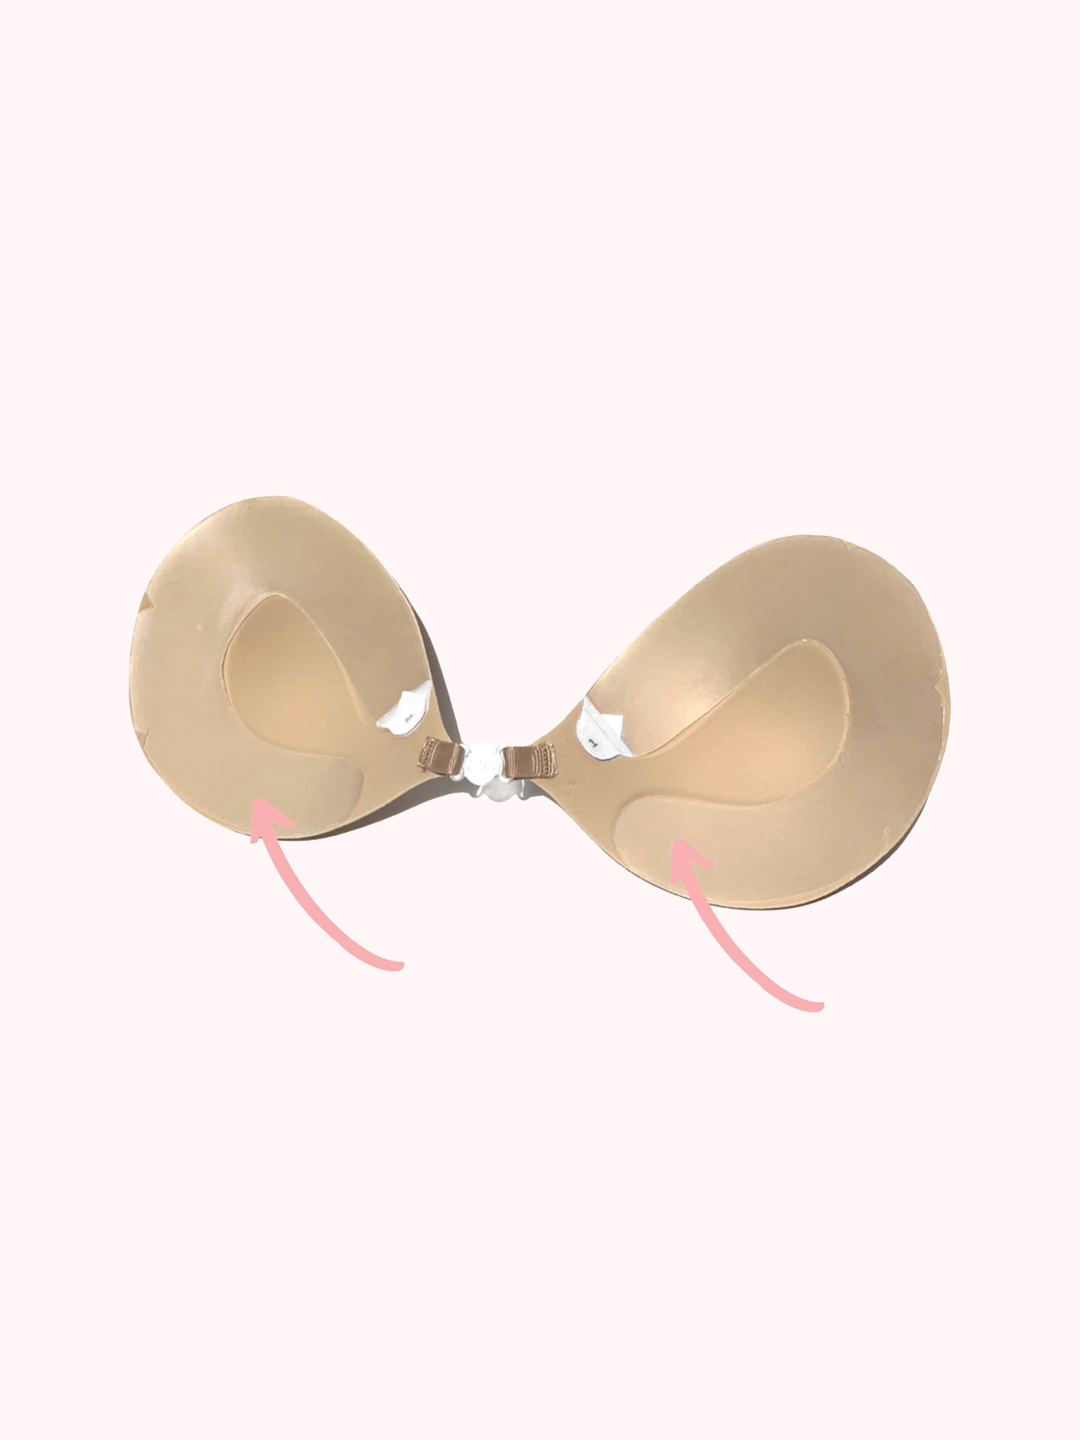 how to place strapless bra adhesive on a strapless bra